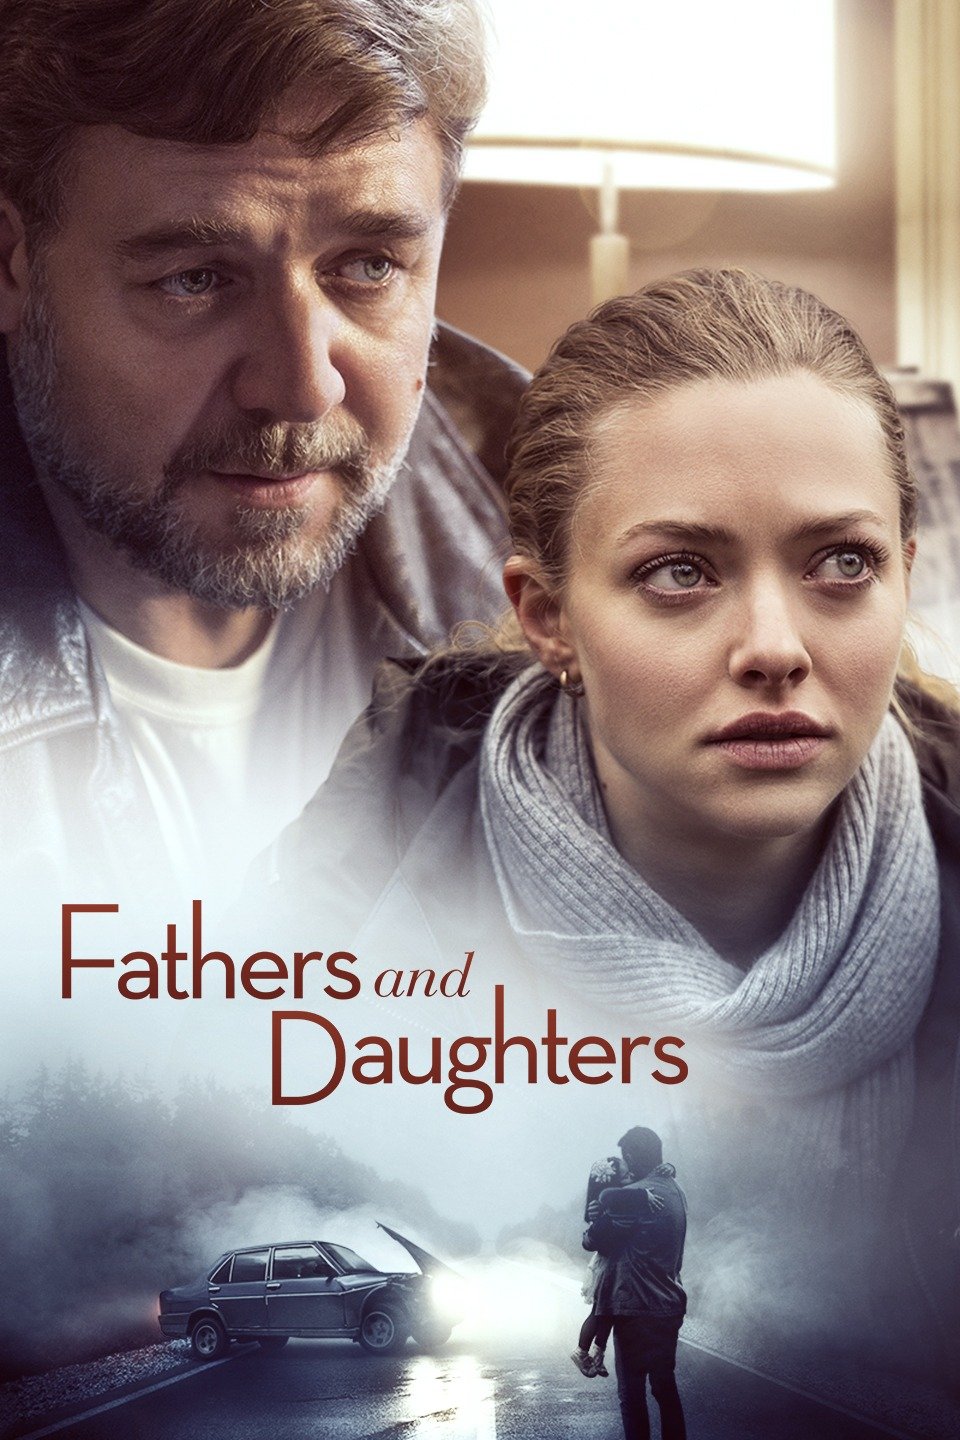 Sleeping Sexmovi - Fathers and Daughters - Rotten Tomatoes